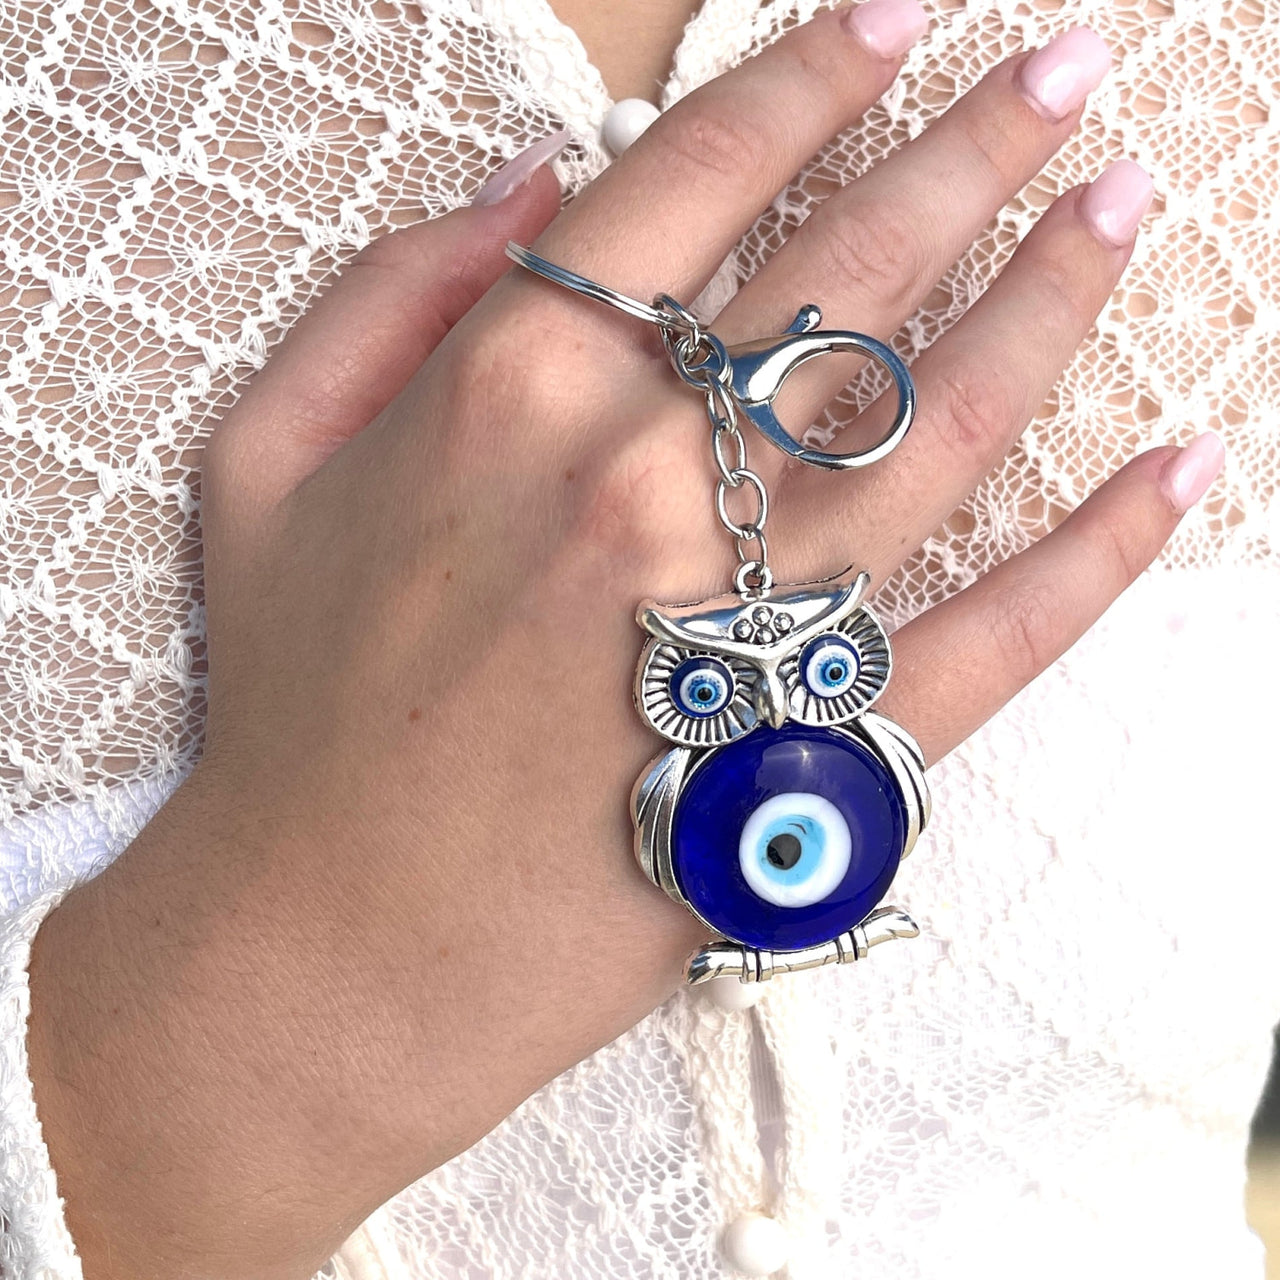 Woman wearing owl ring, Evil Eye Keychain/Ornaments #Q198 in the background